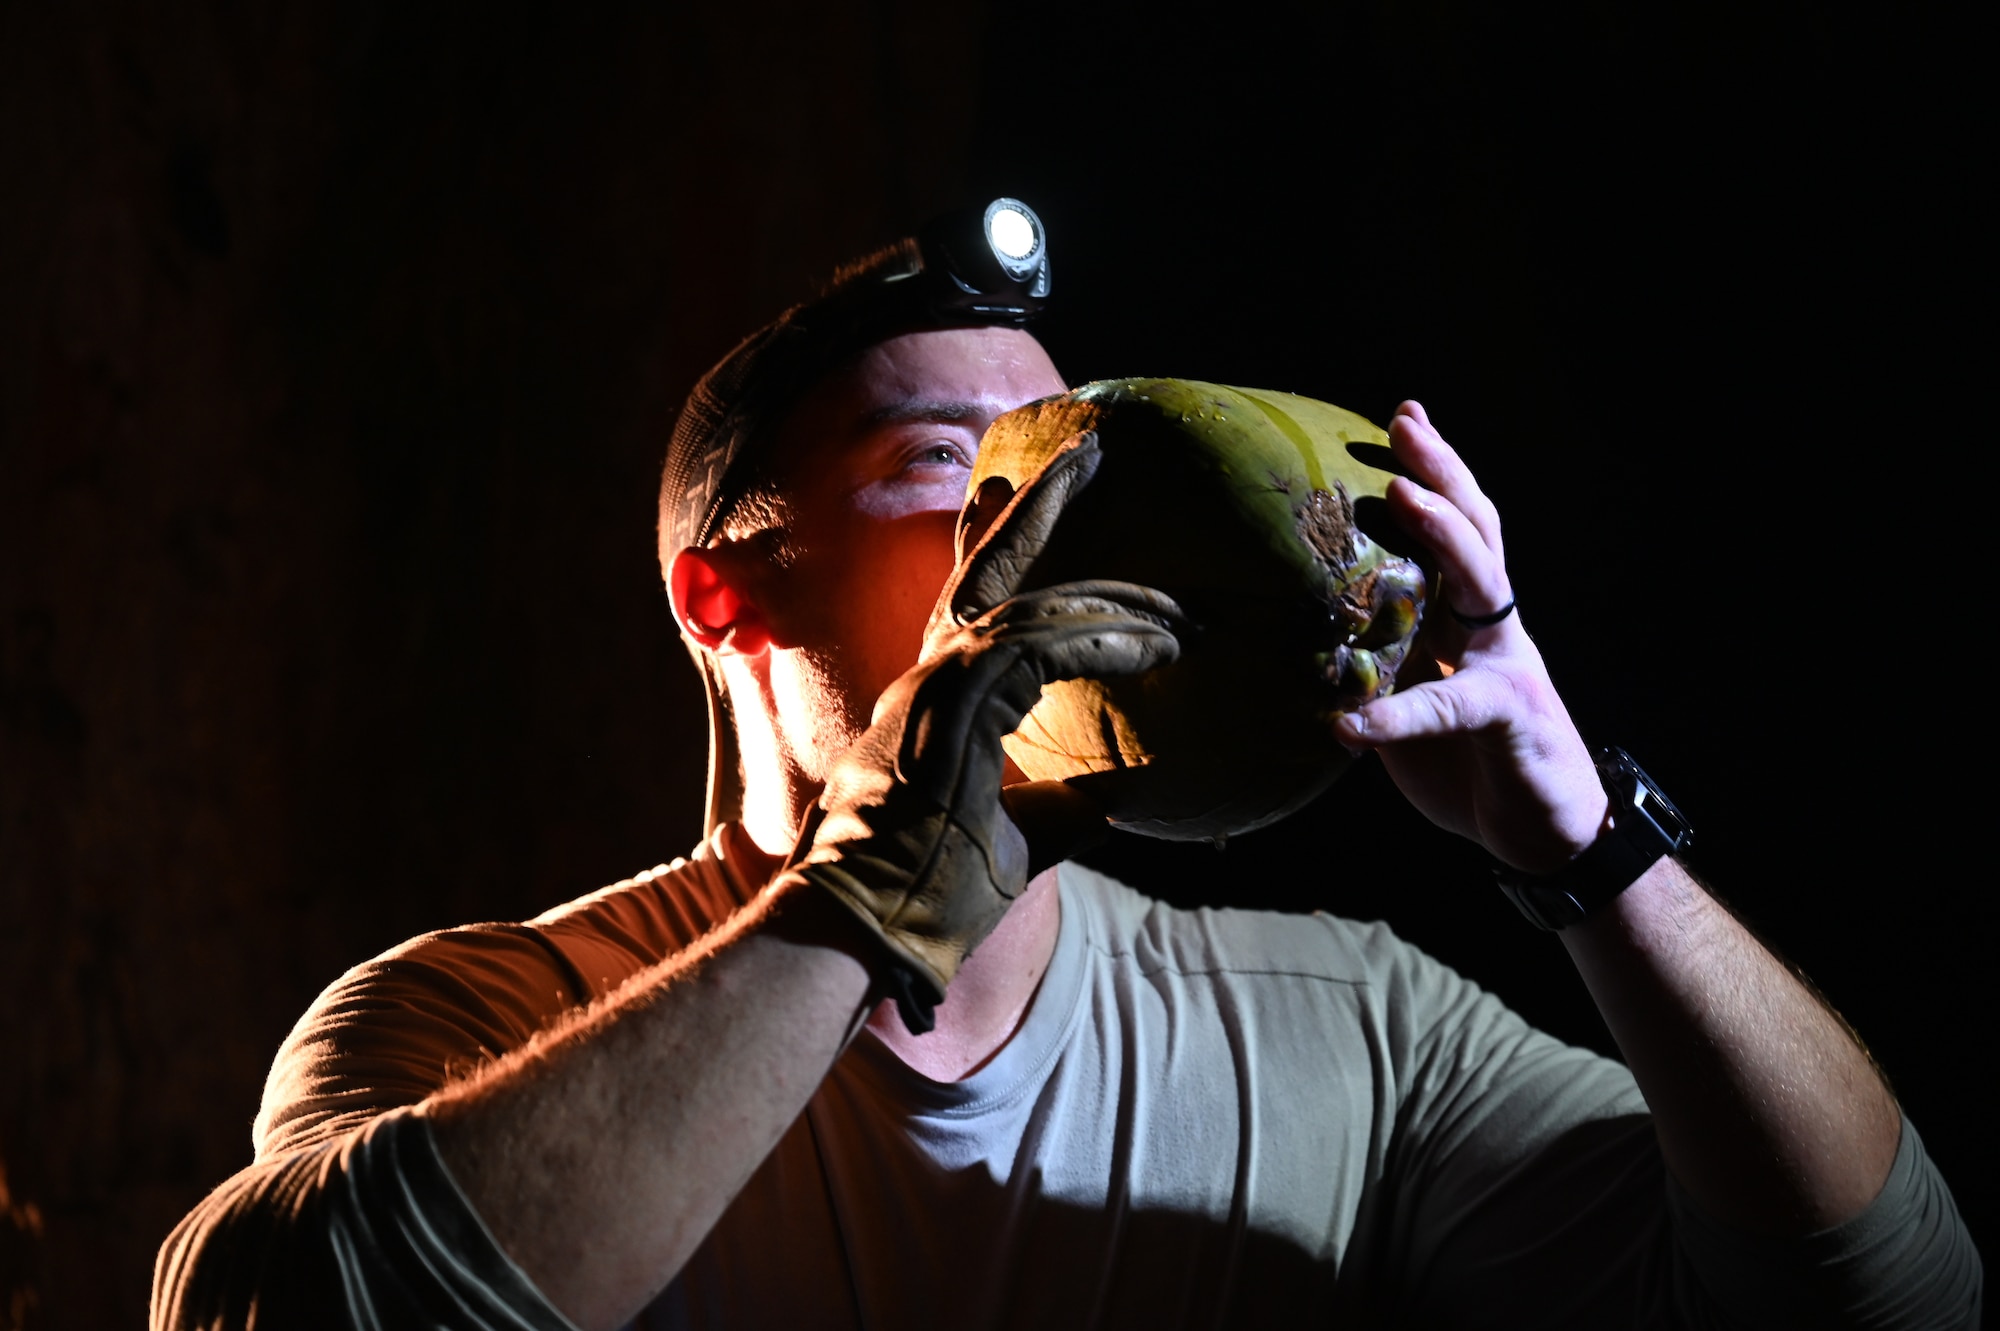 Tech. Sgt. Jared Biller, a Survival, Evasion, Resistance, and Escape specialist assigned to the 3rd Air Expeditionary Wing, drinks fresh coconut water from a coconut during Exercise Agile Reaper at Chulu Beach, Tinian, Northern Mariana Islands, March 3, 2023. SERE specialists utilized AR 23-1 to test and validate various survival equipment for Agile Combat Employment to be able to be self-sustaining in an austere environment. Some challenges members can face in these environments include weather and cloud cover, which can affect equipment like solar charging panels. (U.S. Air Force photo by Tech. Sgt. Hailey Staker)